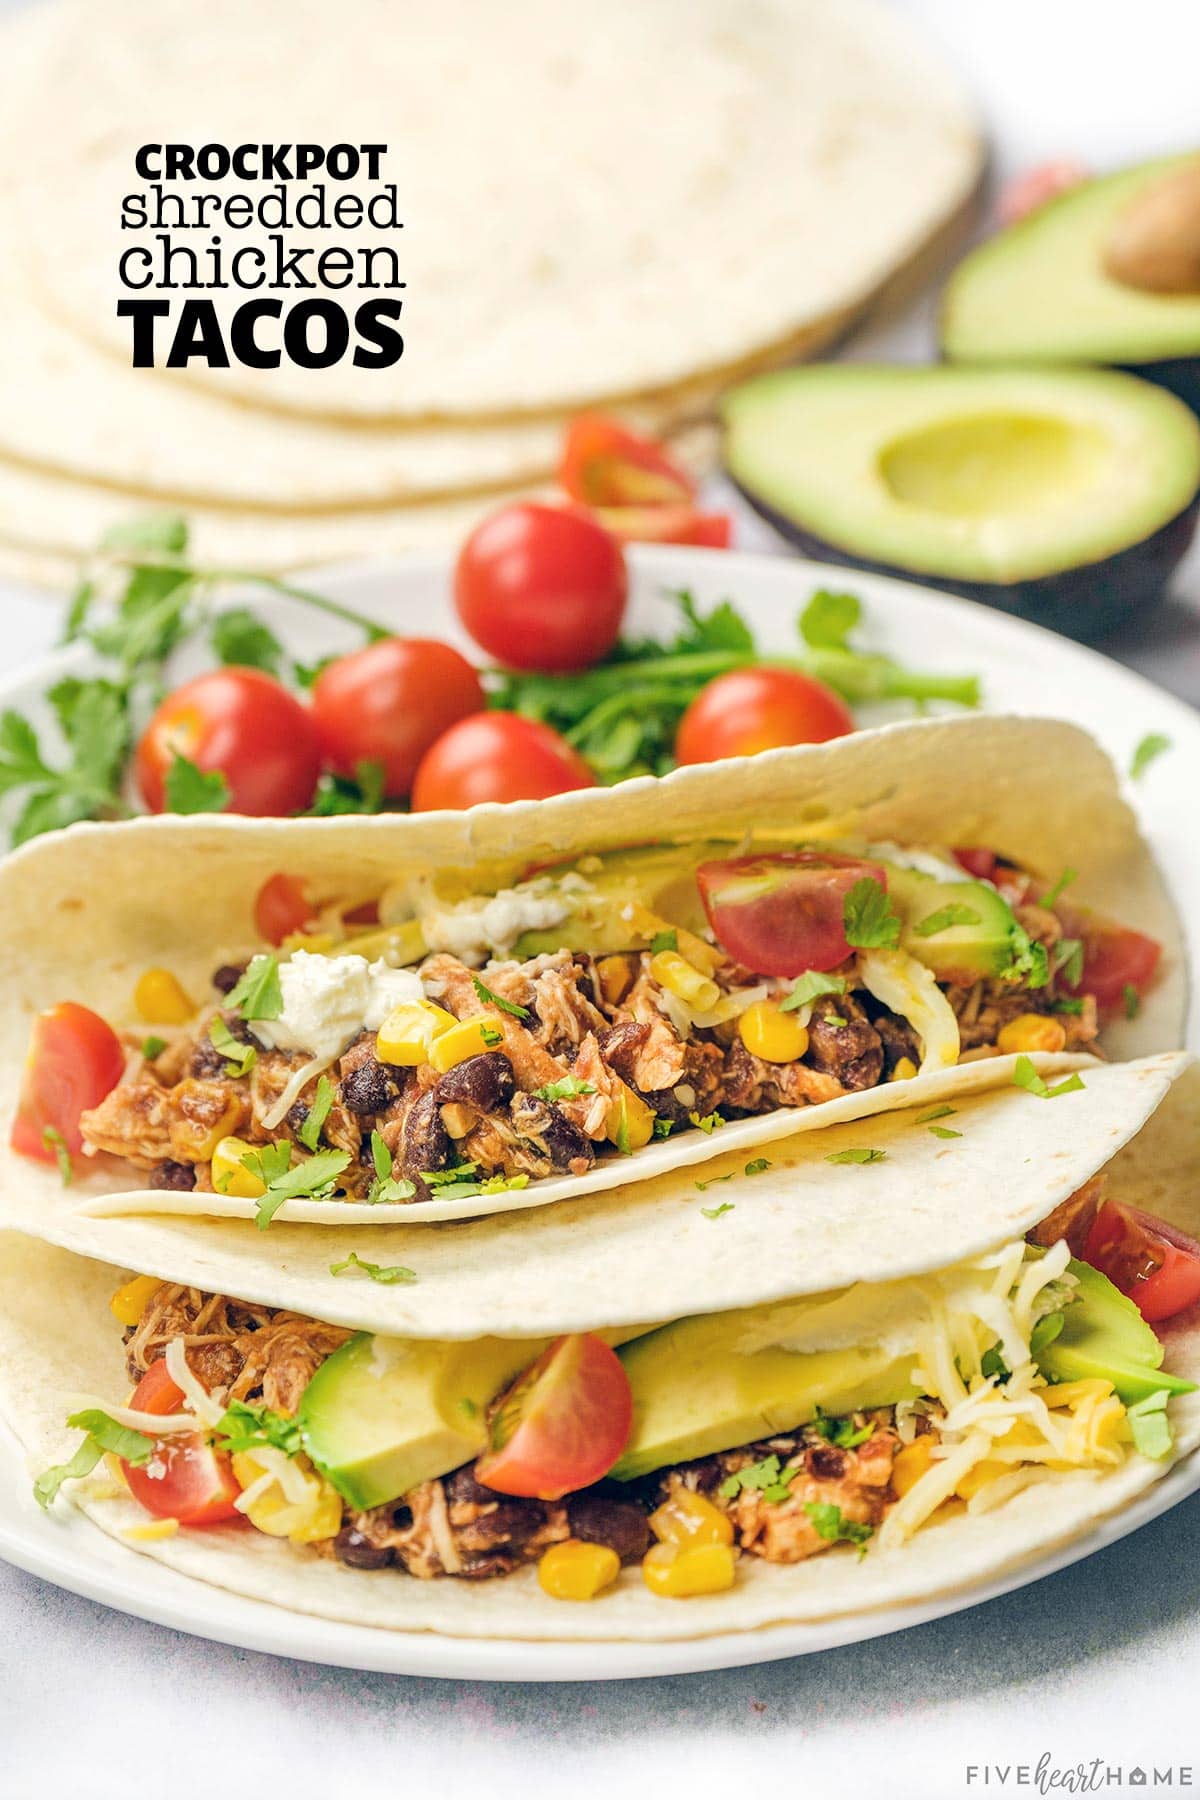 https://www.fivehearthome.com/wp-content/uploads/2023/05/Crockpot-Shredded-Chicken-Tacos-Recipe-by-Five-Heart-Home_1200pxText50.jpg